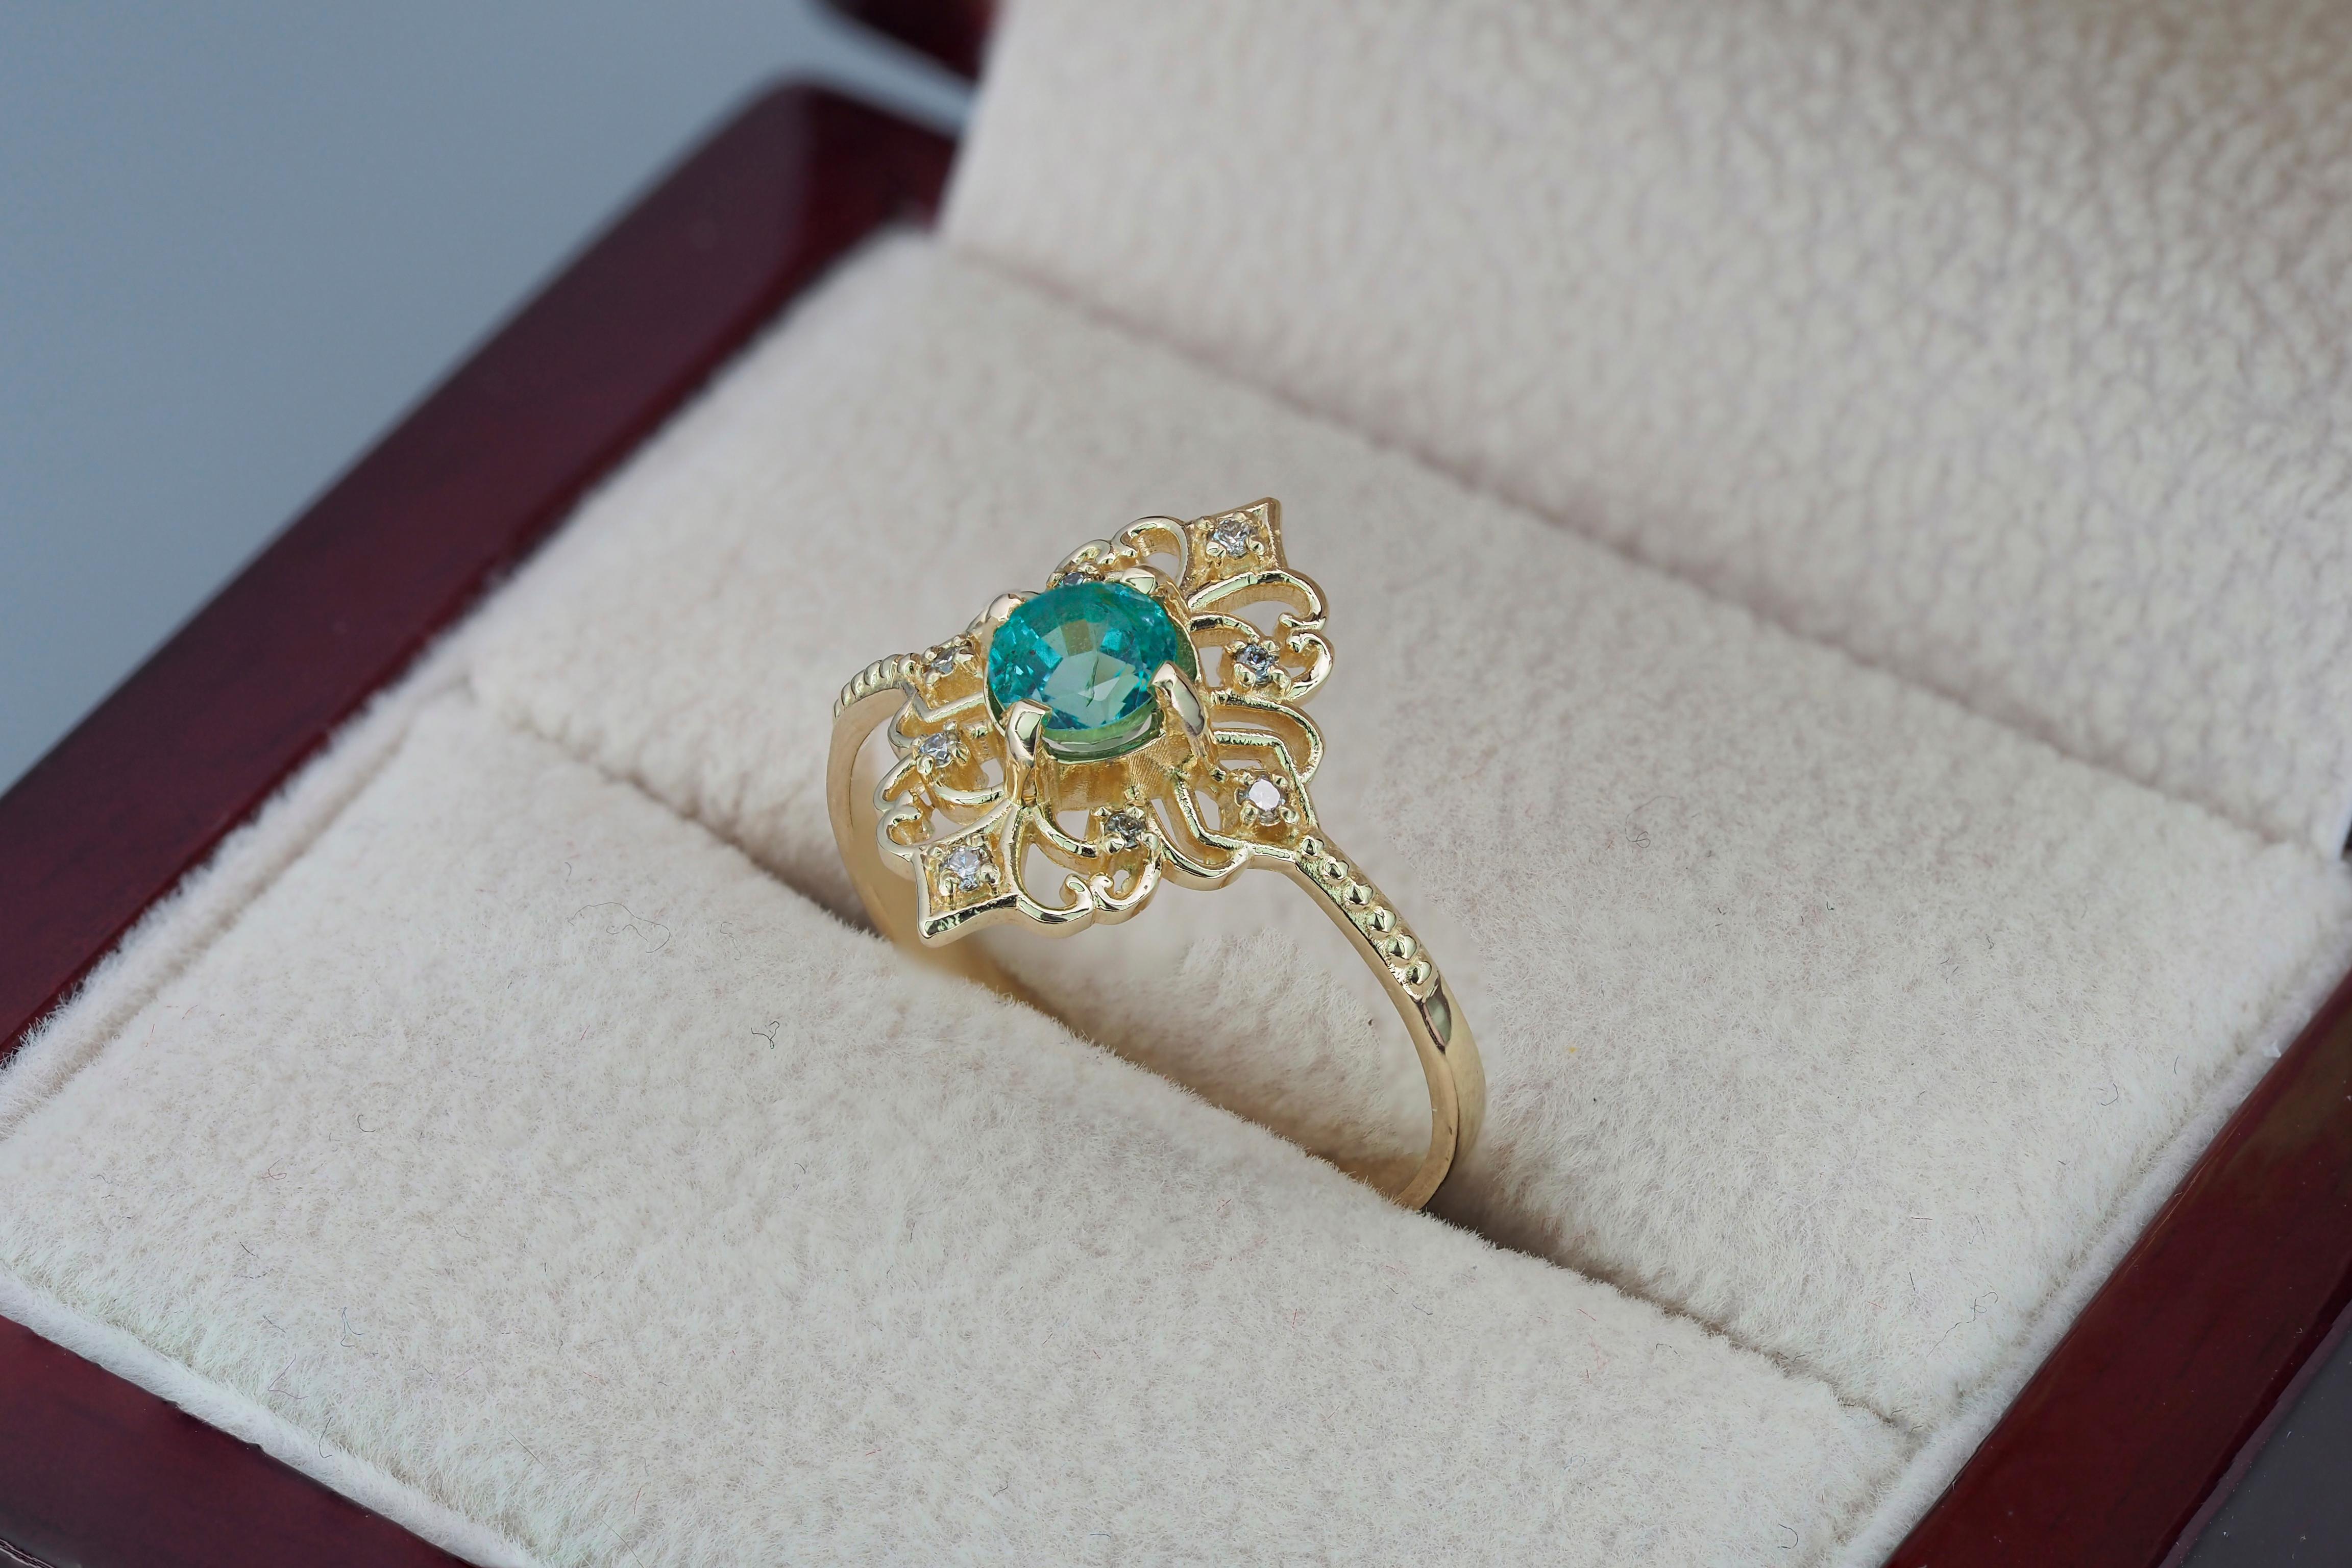 Women's 14 K Gold Ring with Emerald and Diamonds